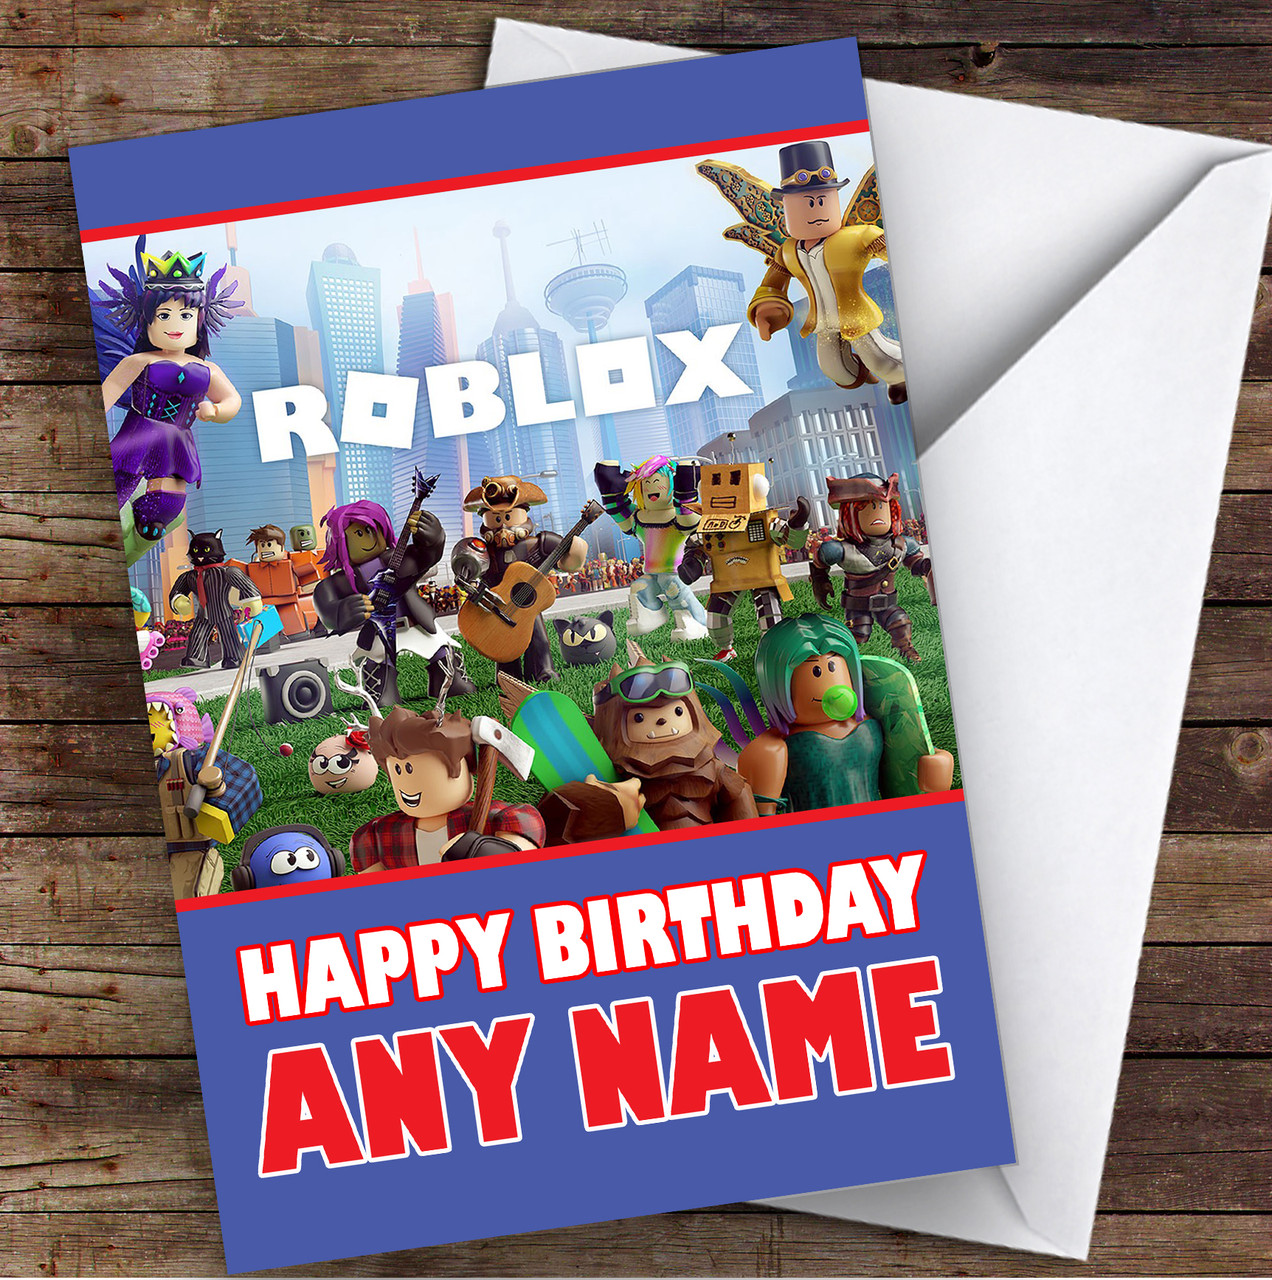 inside the world of Roblox - Games -  Greeting Card for Sale by